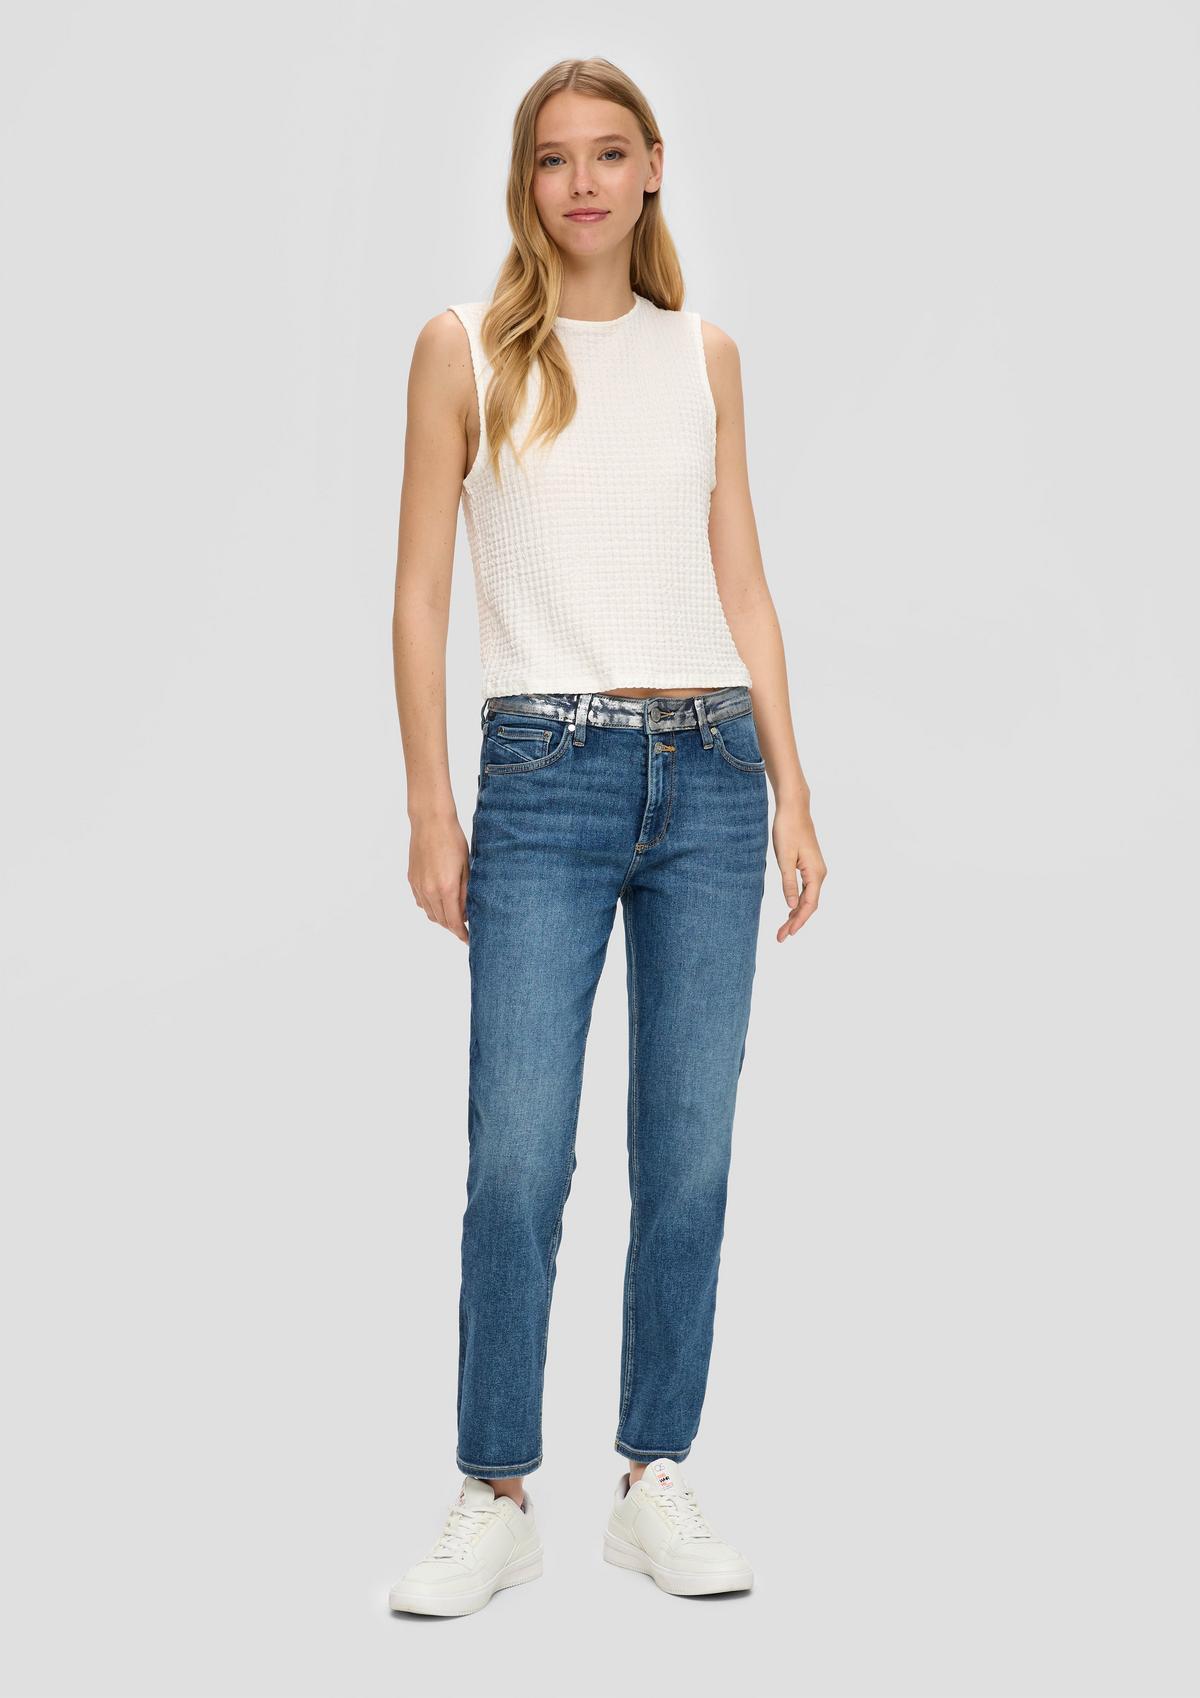 s.Oliver Catie jeans / high rise / straight leg / foil print